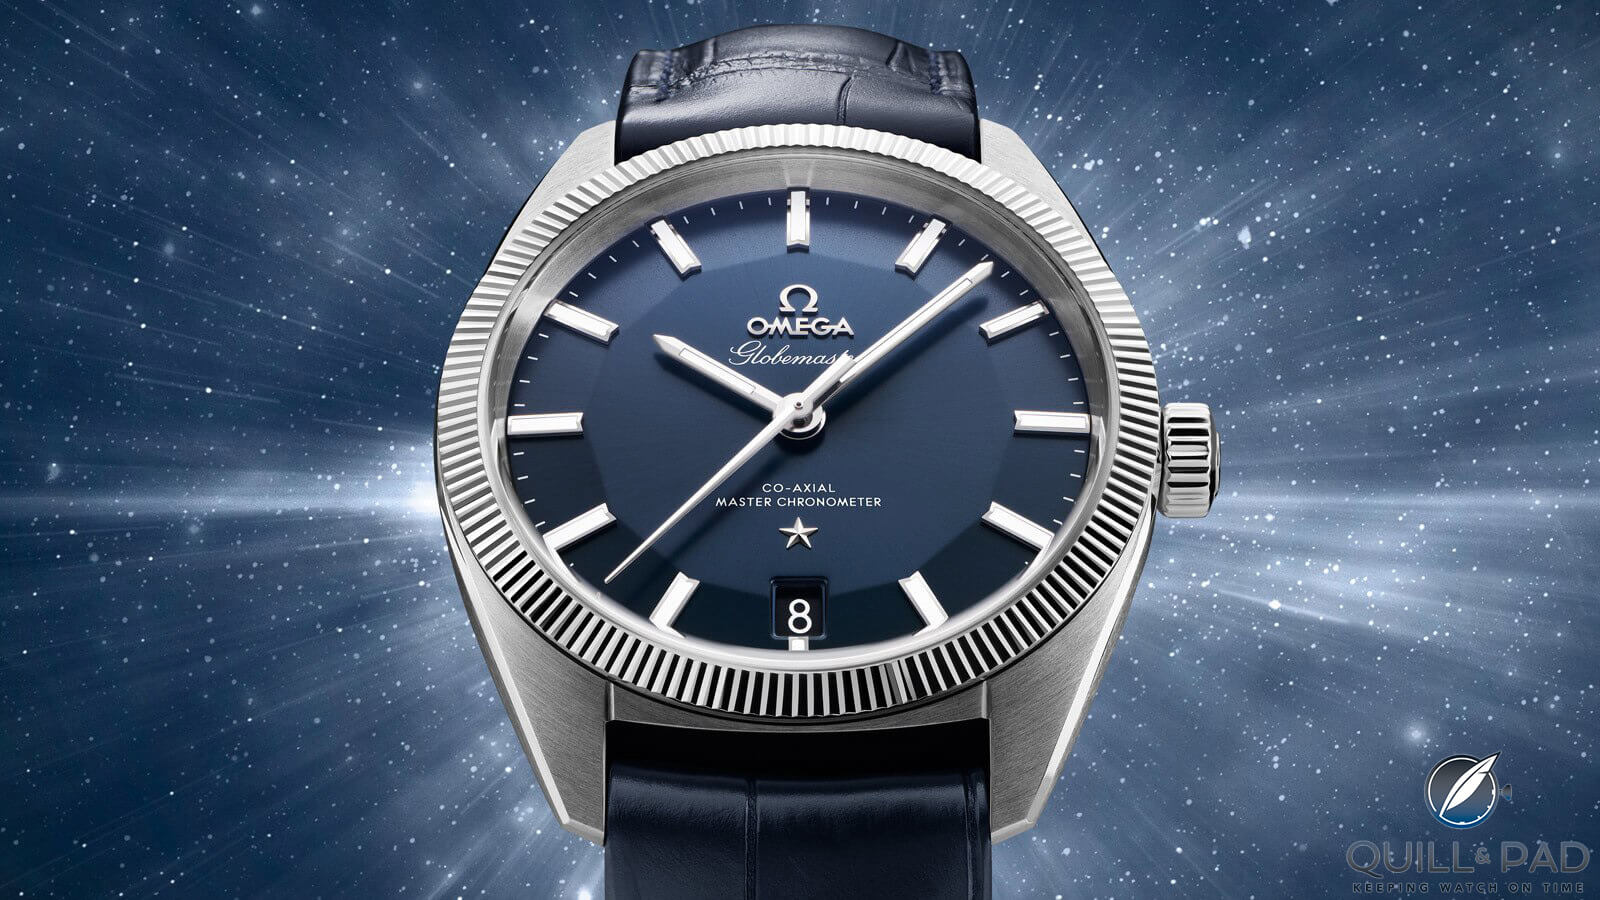 7 Under the Radar Watches from Omega, Zenith, IWC, Jaeger-LeCoultre, Blancpain, Girard-Perregaux and Cartier